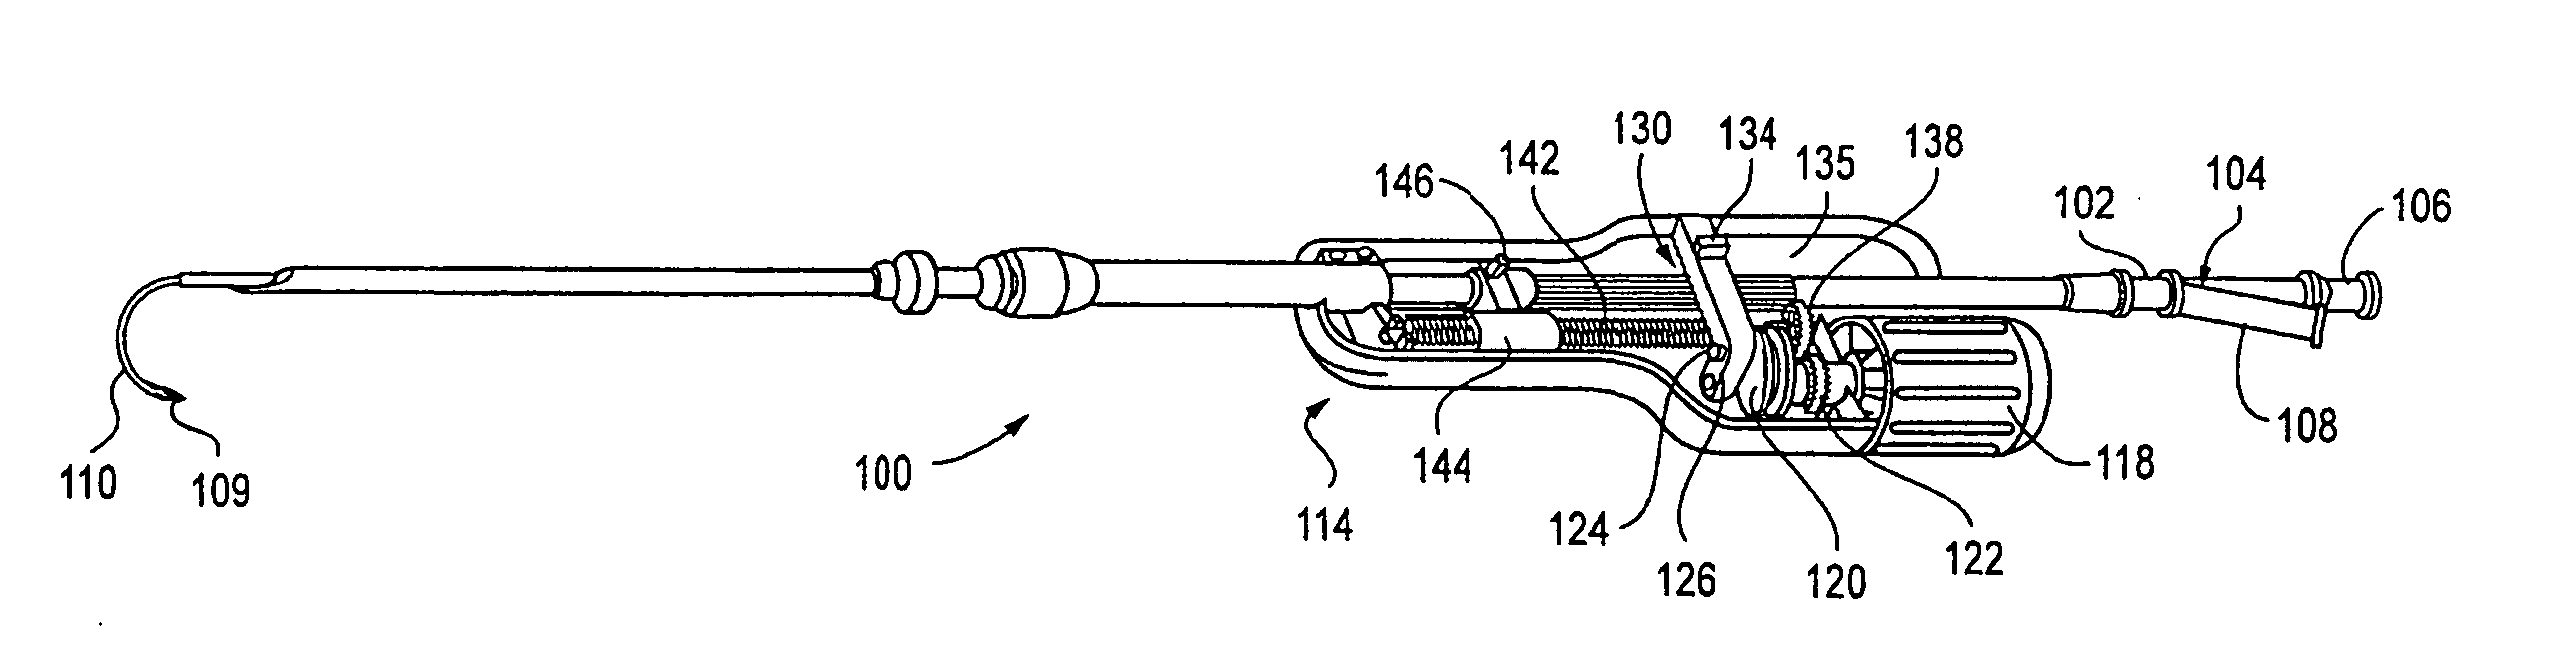 System and method for manipulating a catheter for delivering a substance to a body cavity